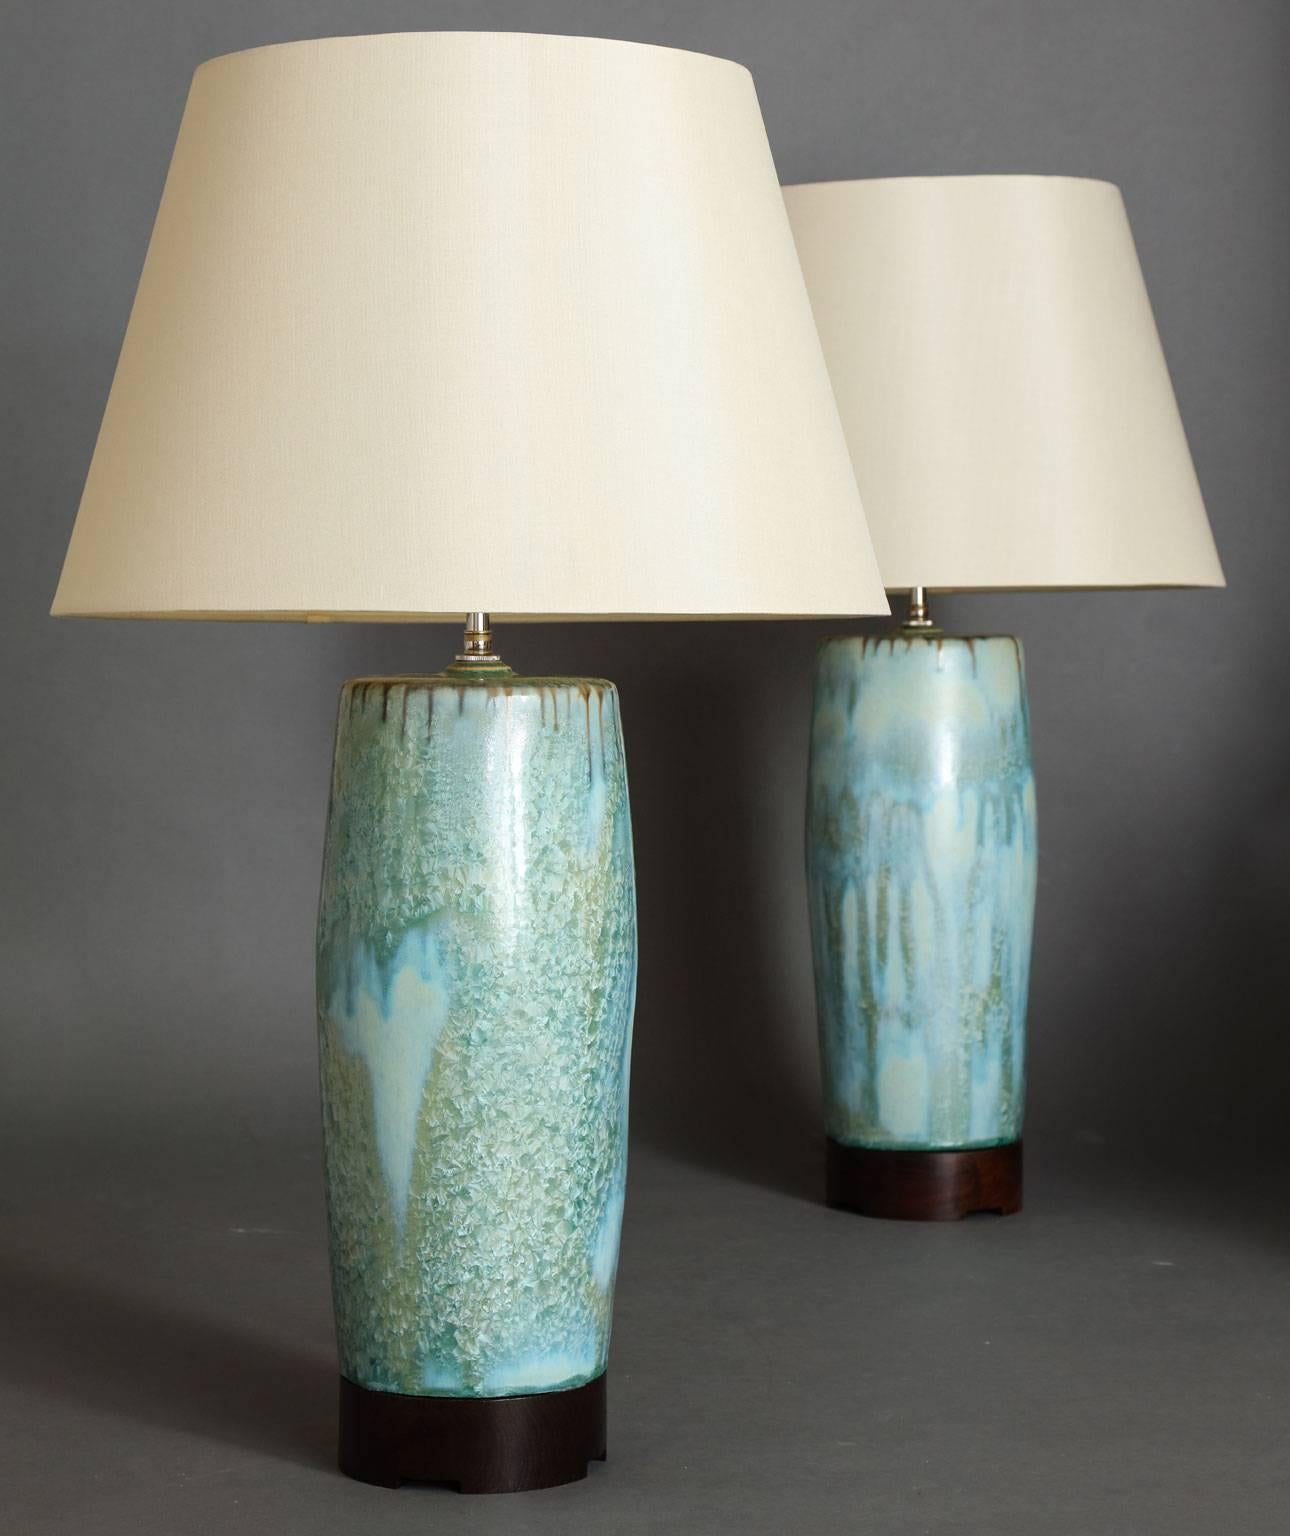 Bulldog table lamp.
Pair of hand-formed ceramic lamp base available in many beautiful glazes, 
with optional wood bases available in two heights and a variety of wood finishes. Wired with two-bulb cluster in either antique brass or polished